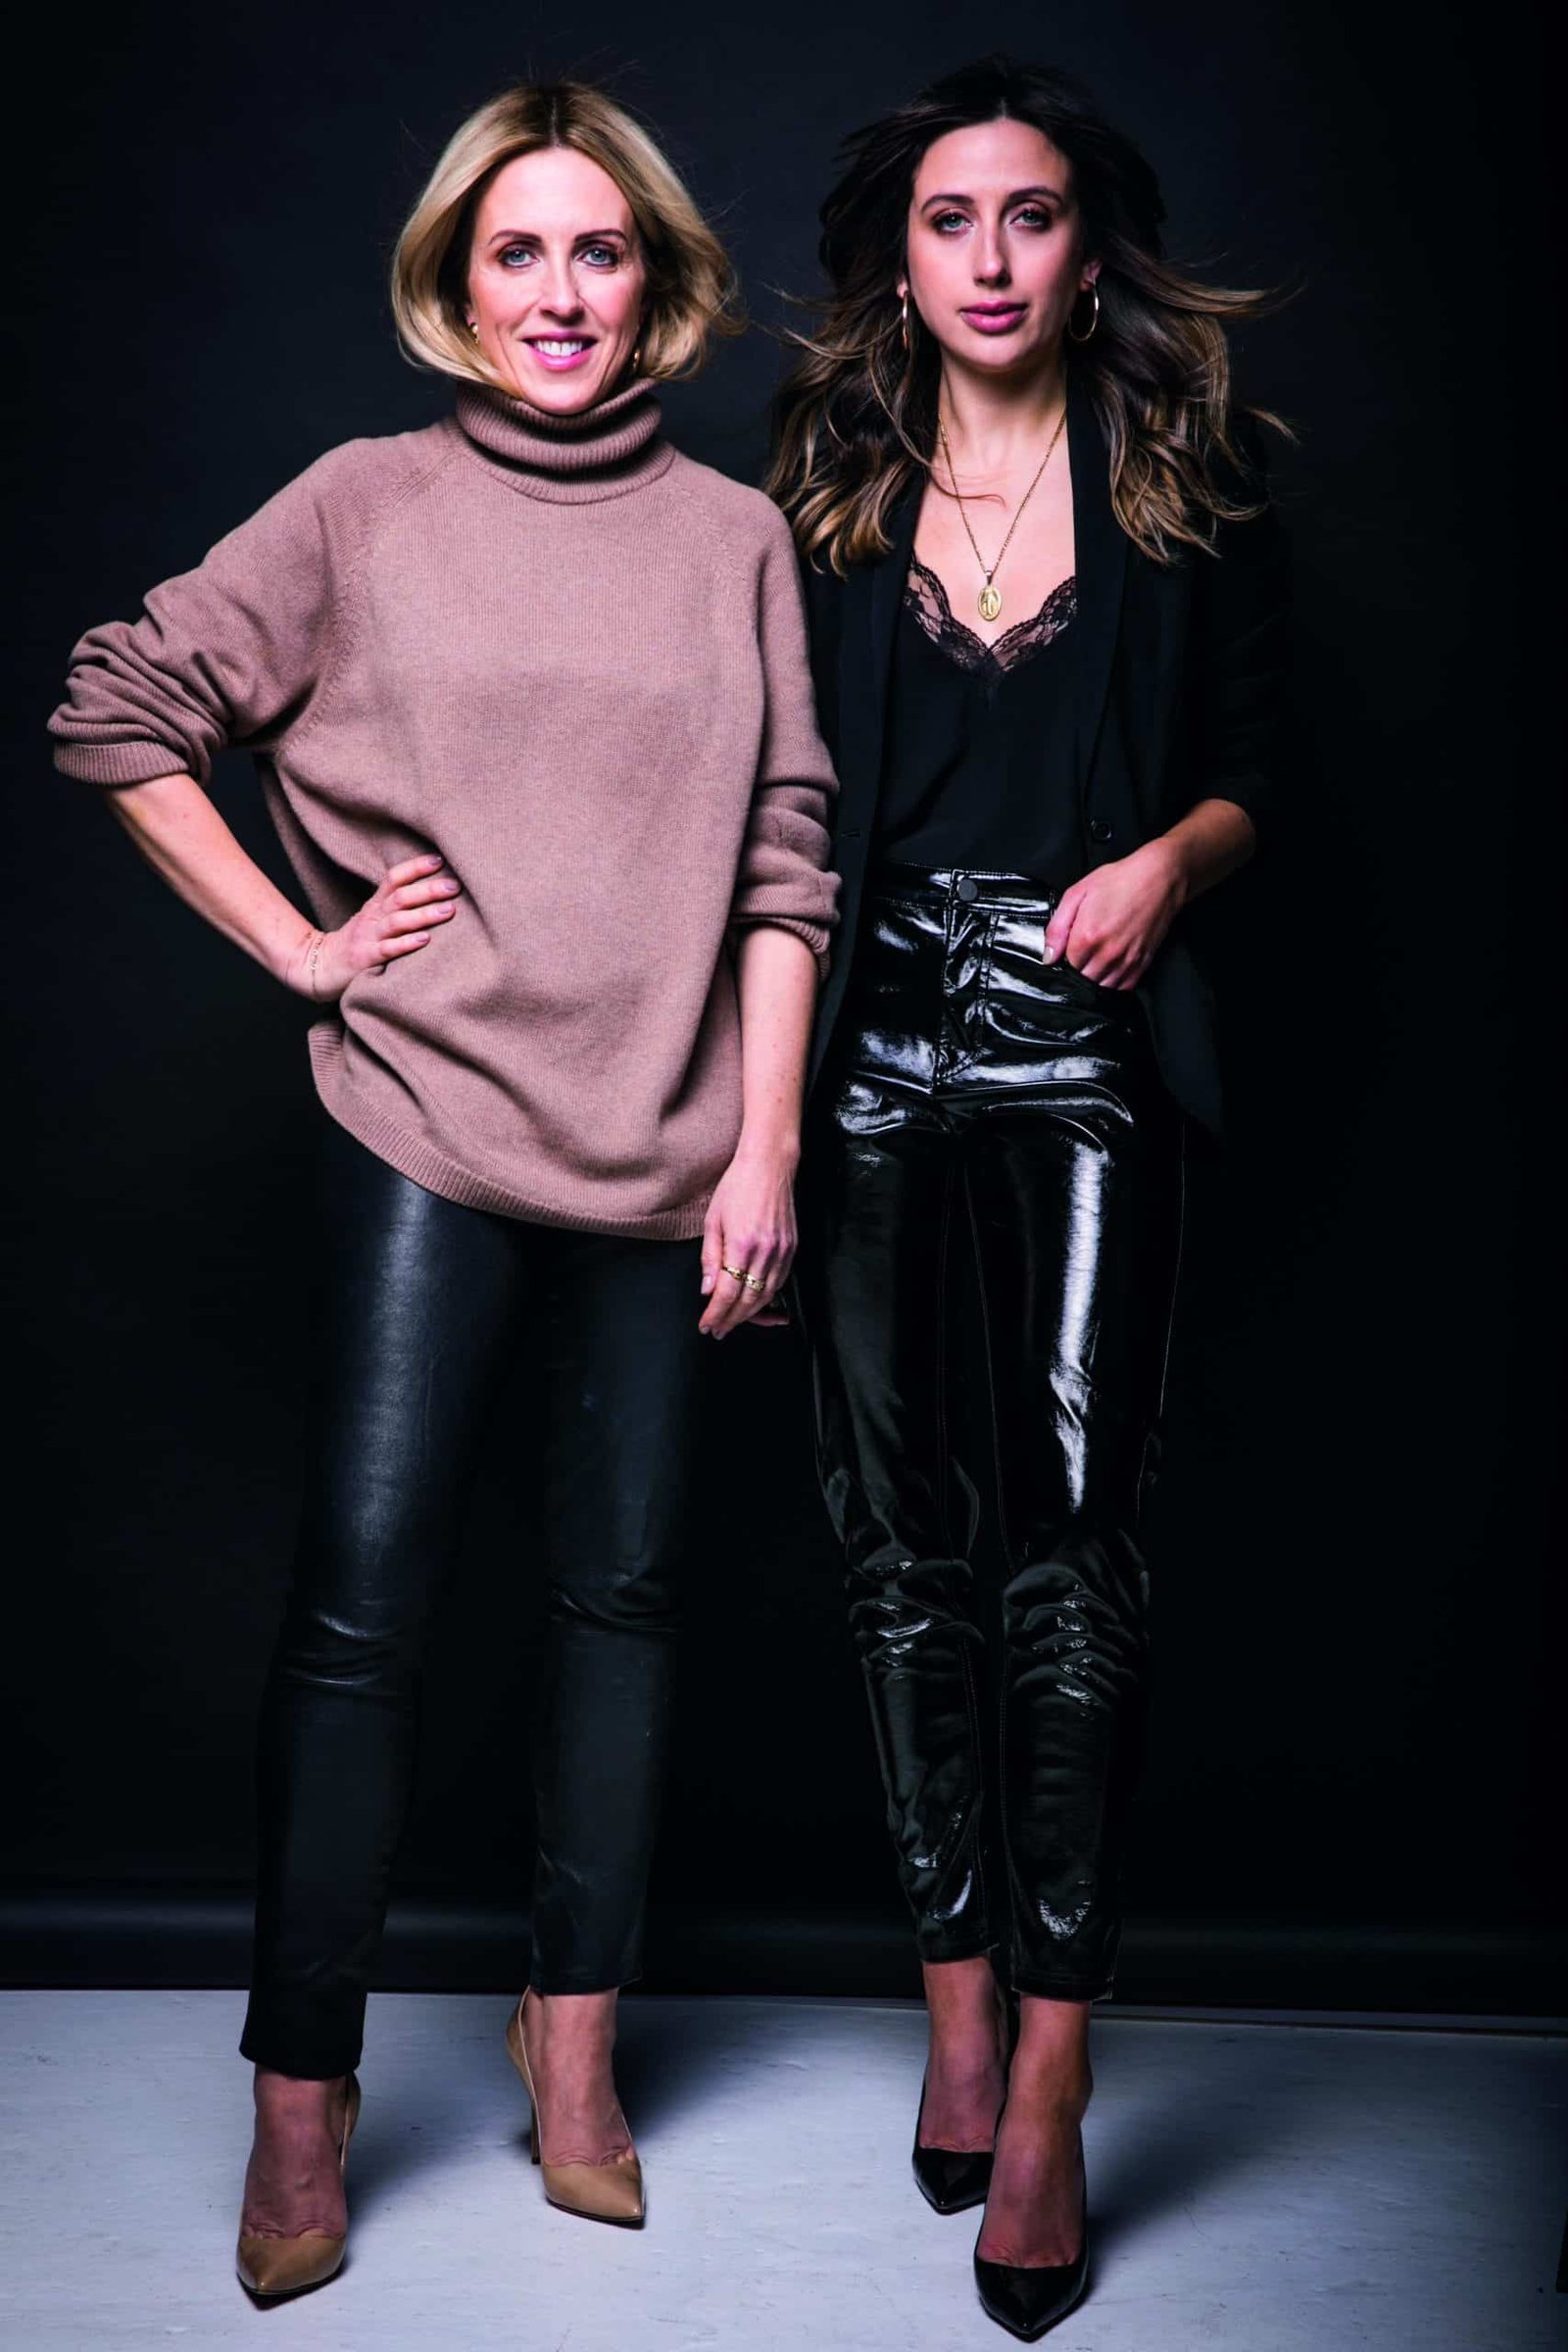 Two women in leather pants fulfilling a photo pose.